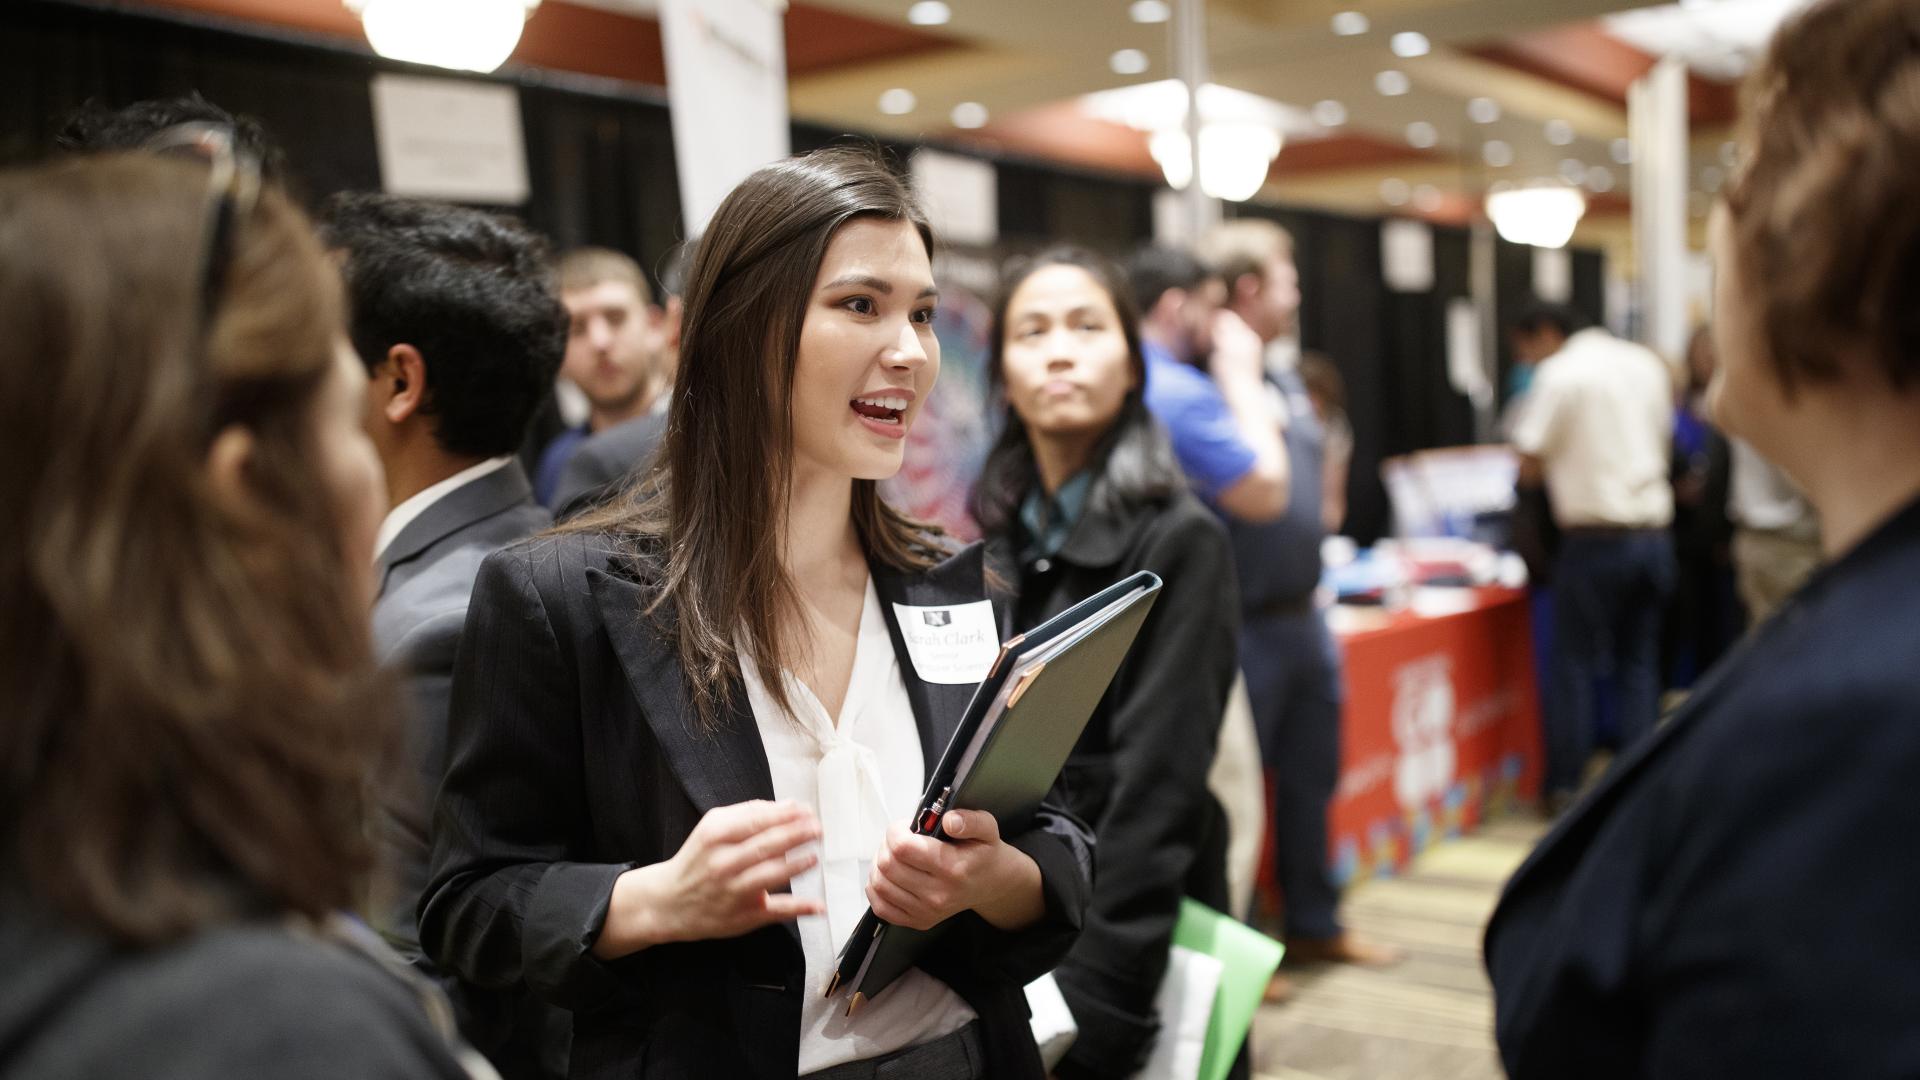 Students at the career fair.